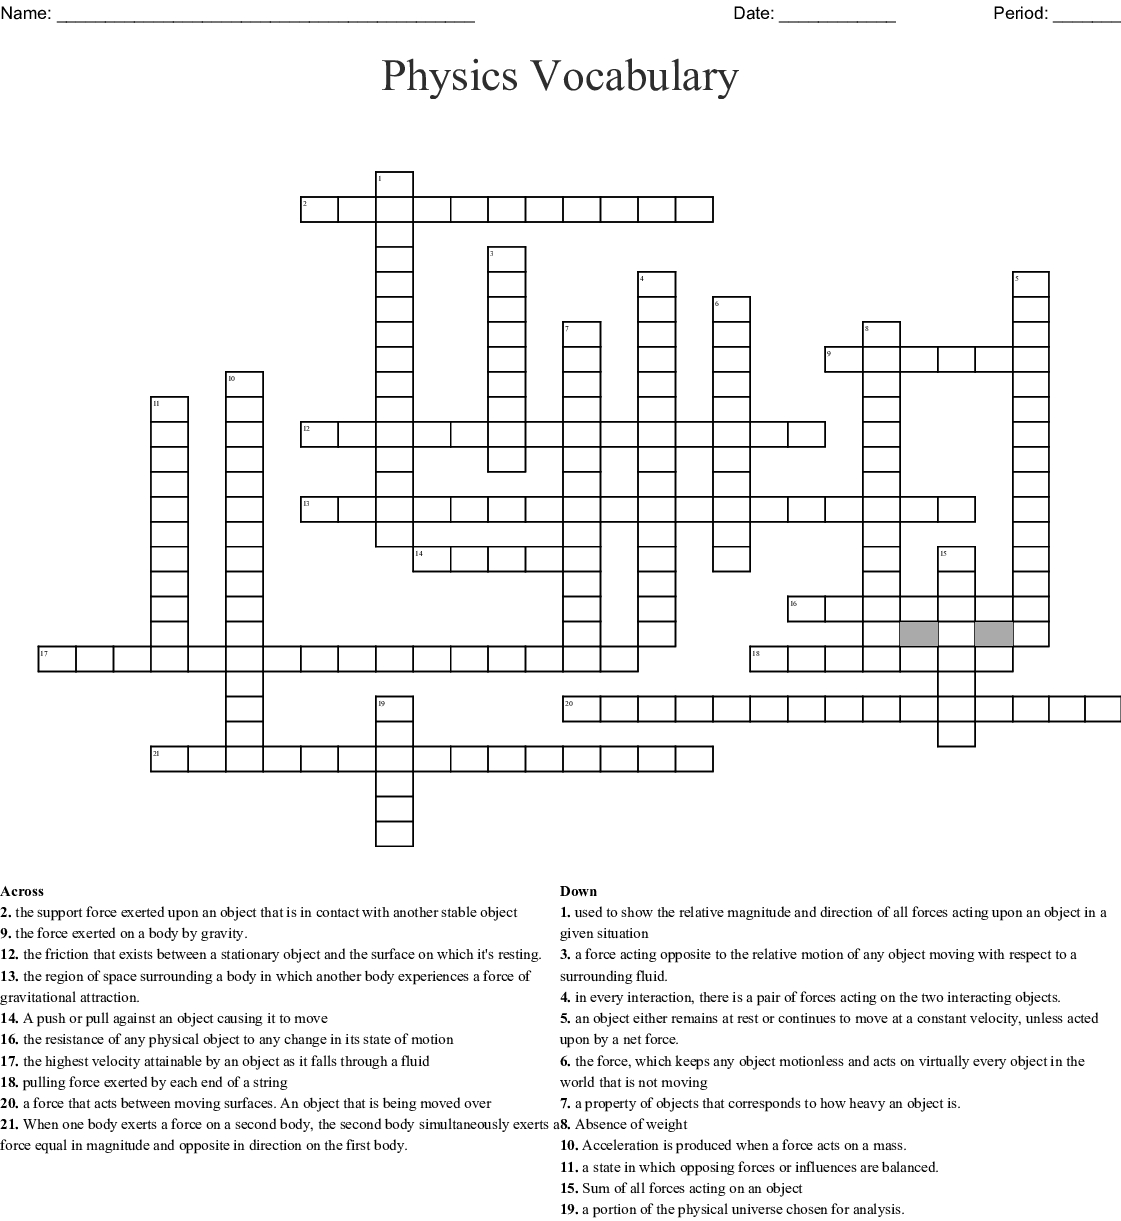 Physics Vocabulary Crossword - Wordmint - Physics Crossword Puzzles Printable With Answers